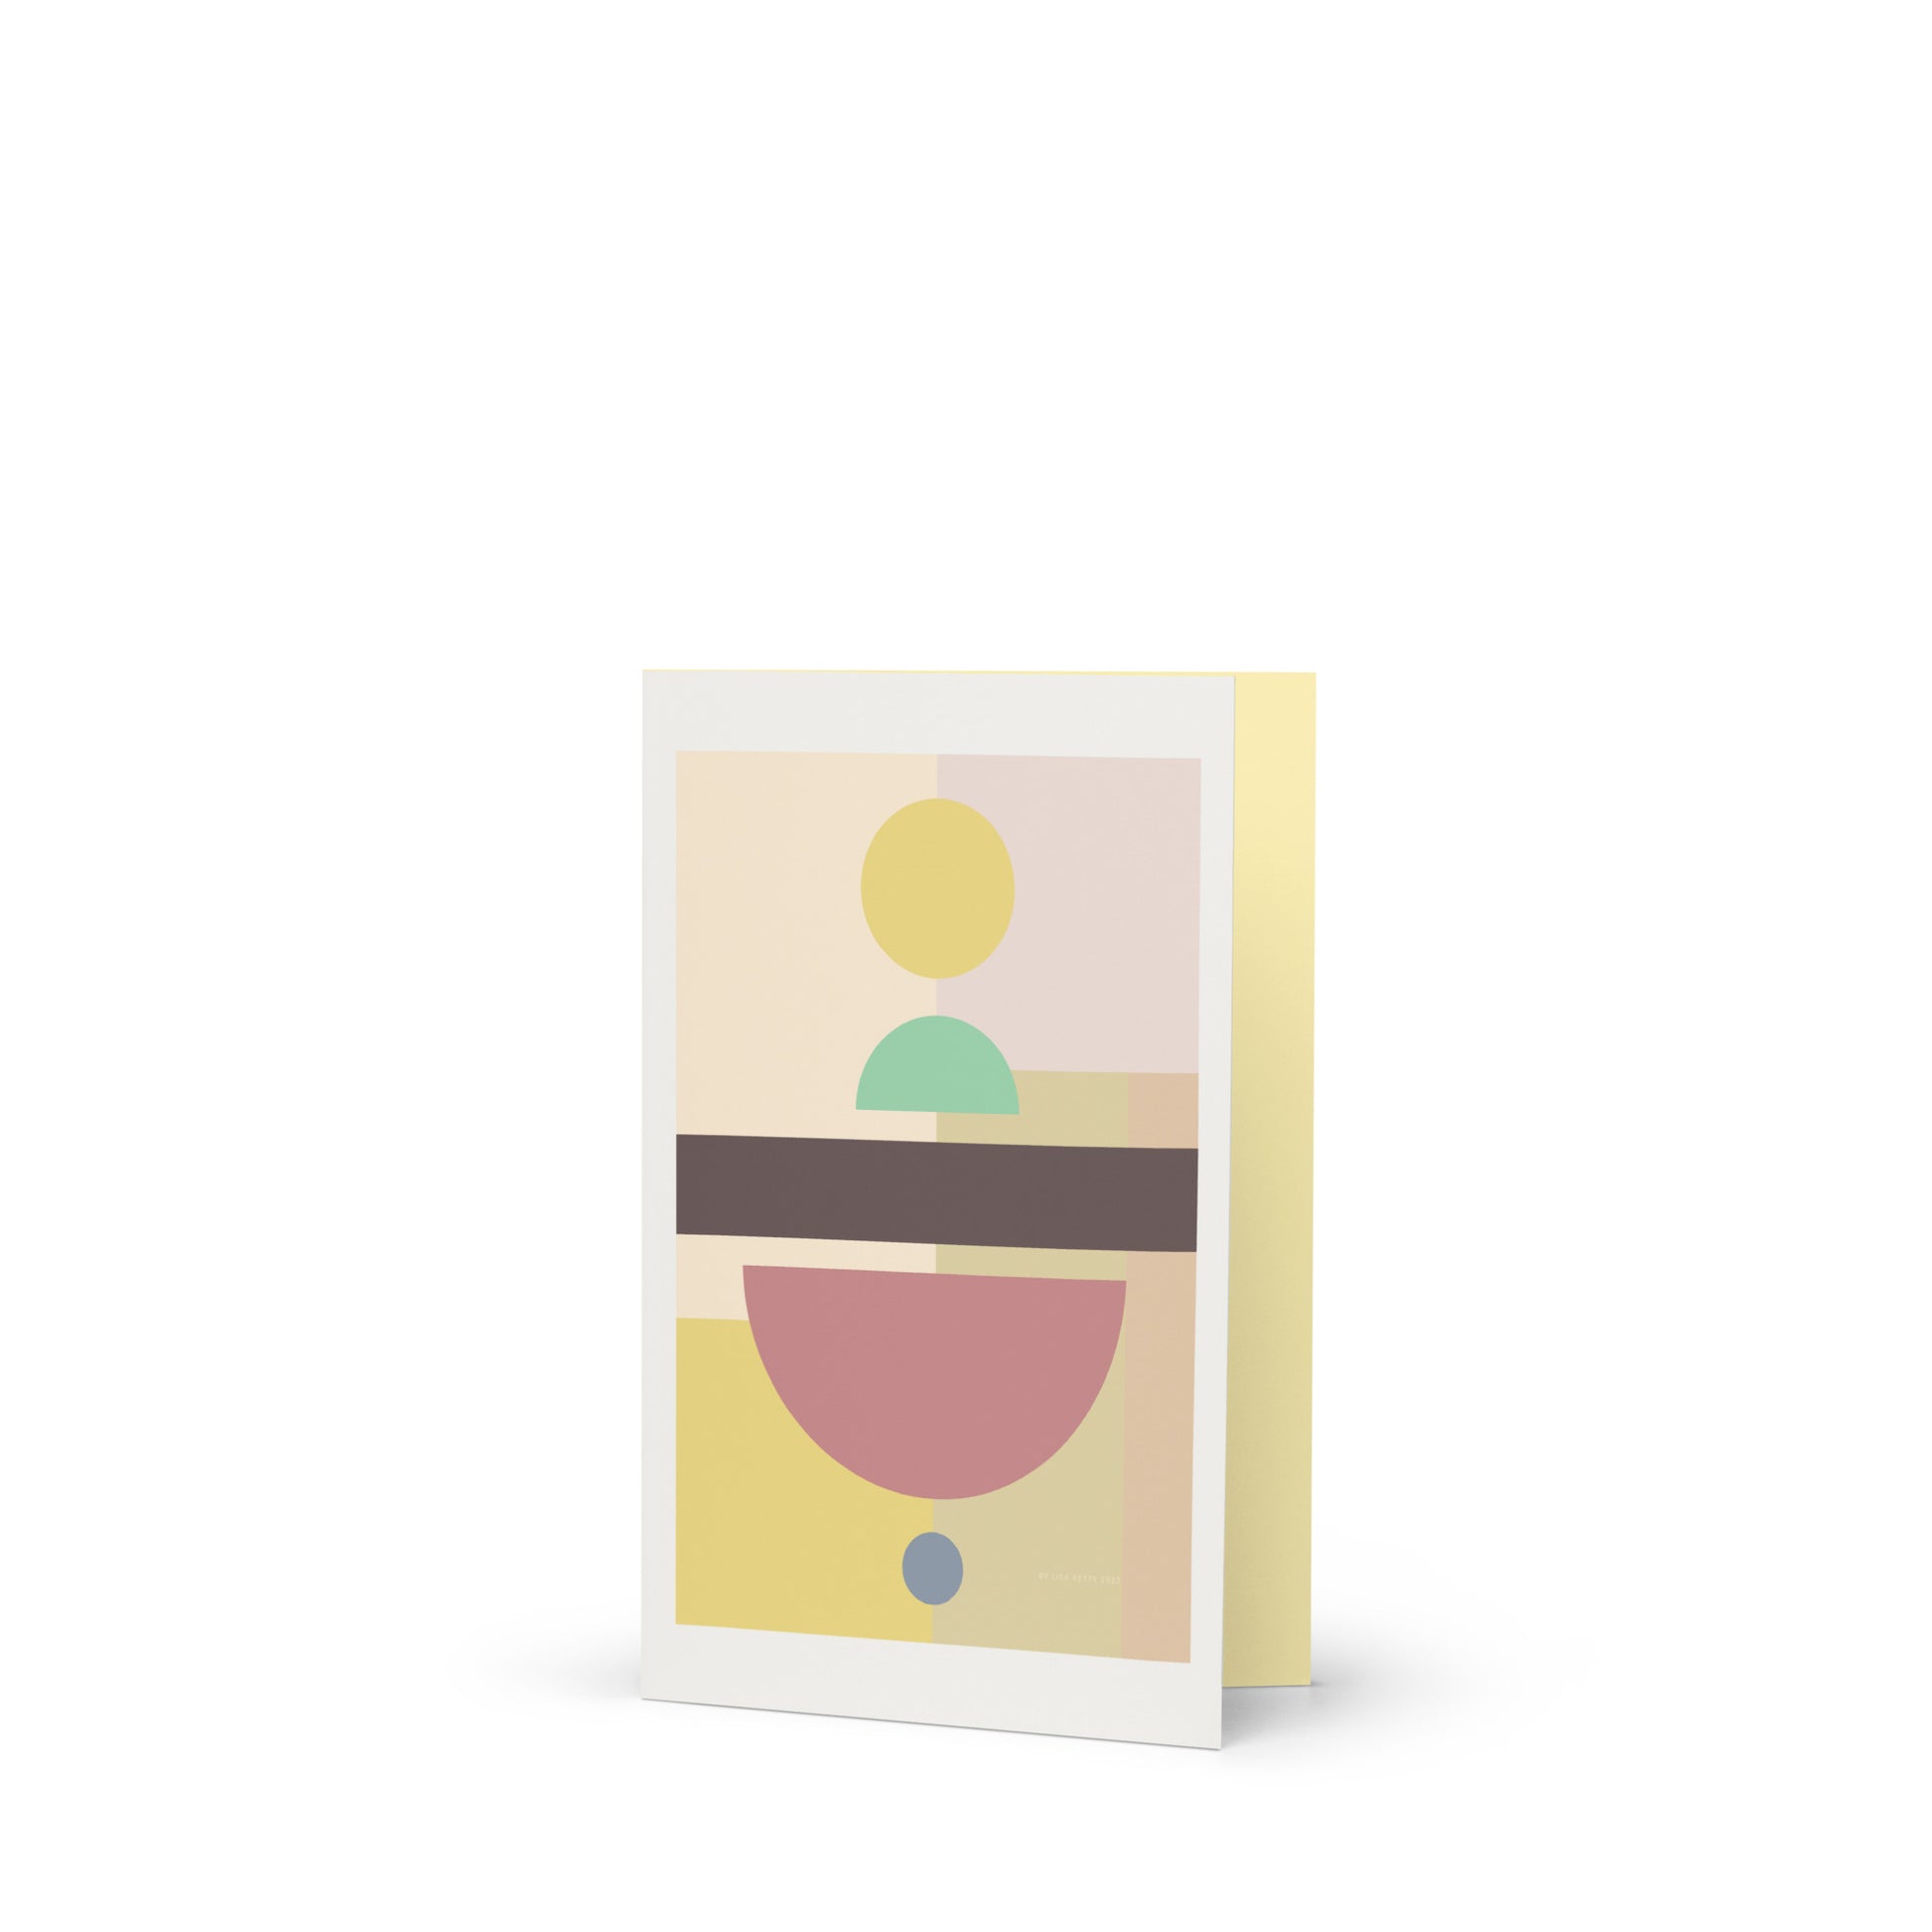 The Rattle Greeting card